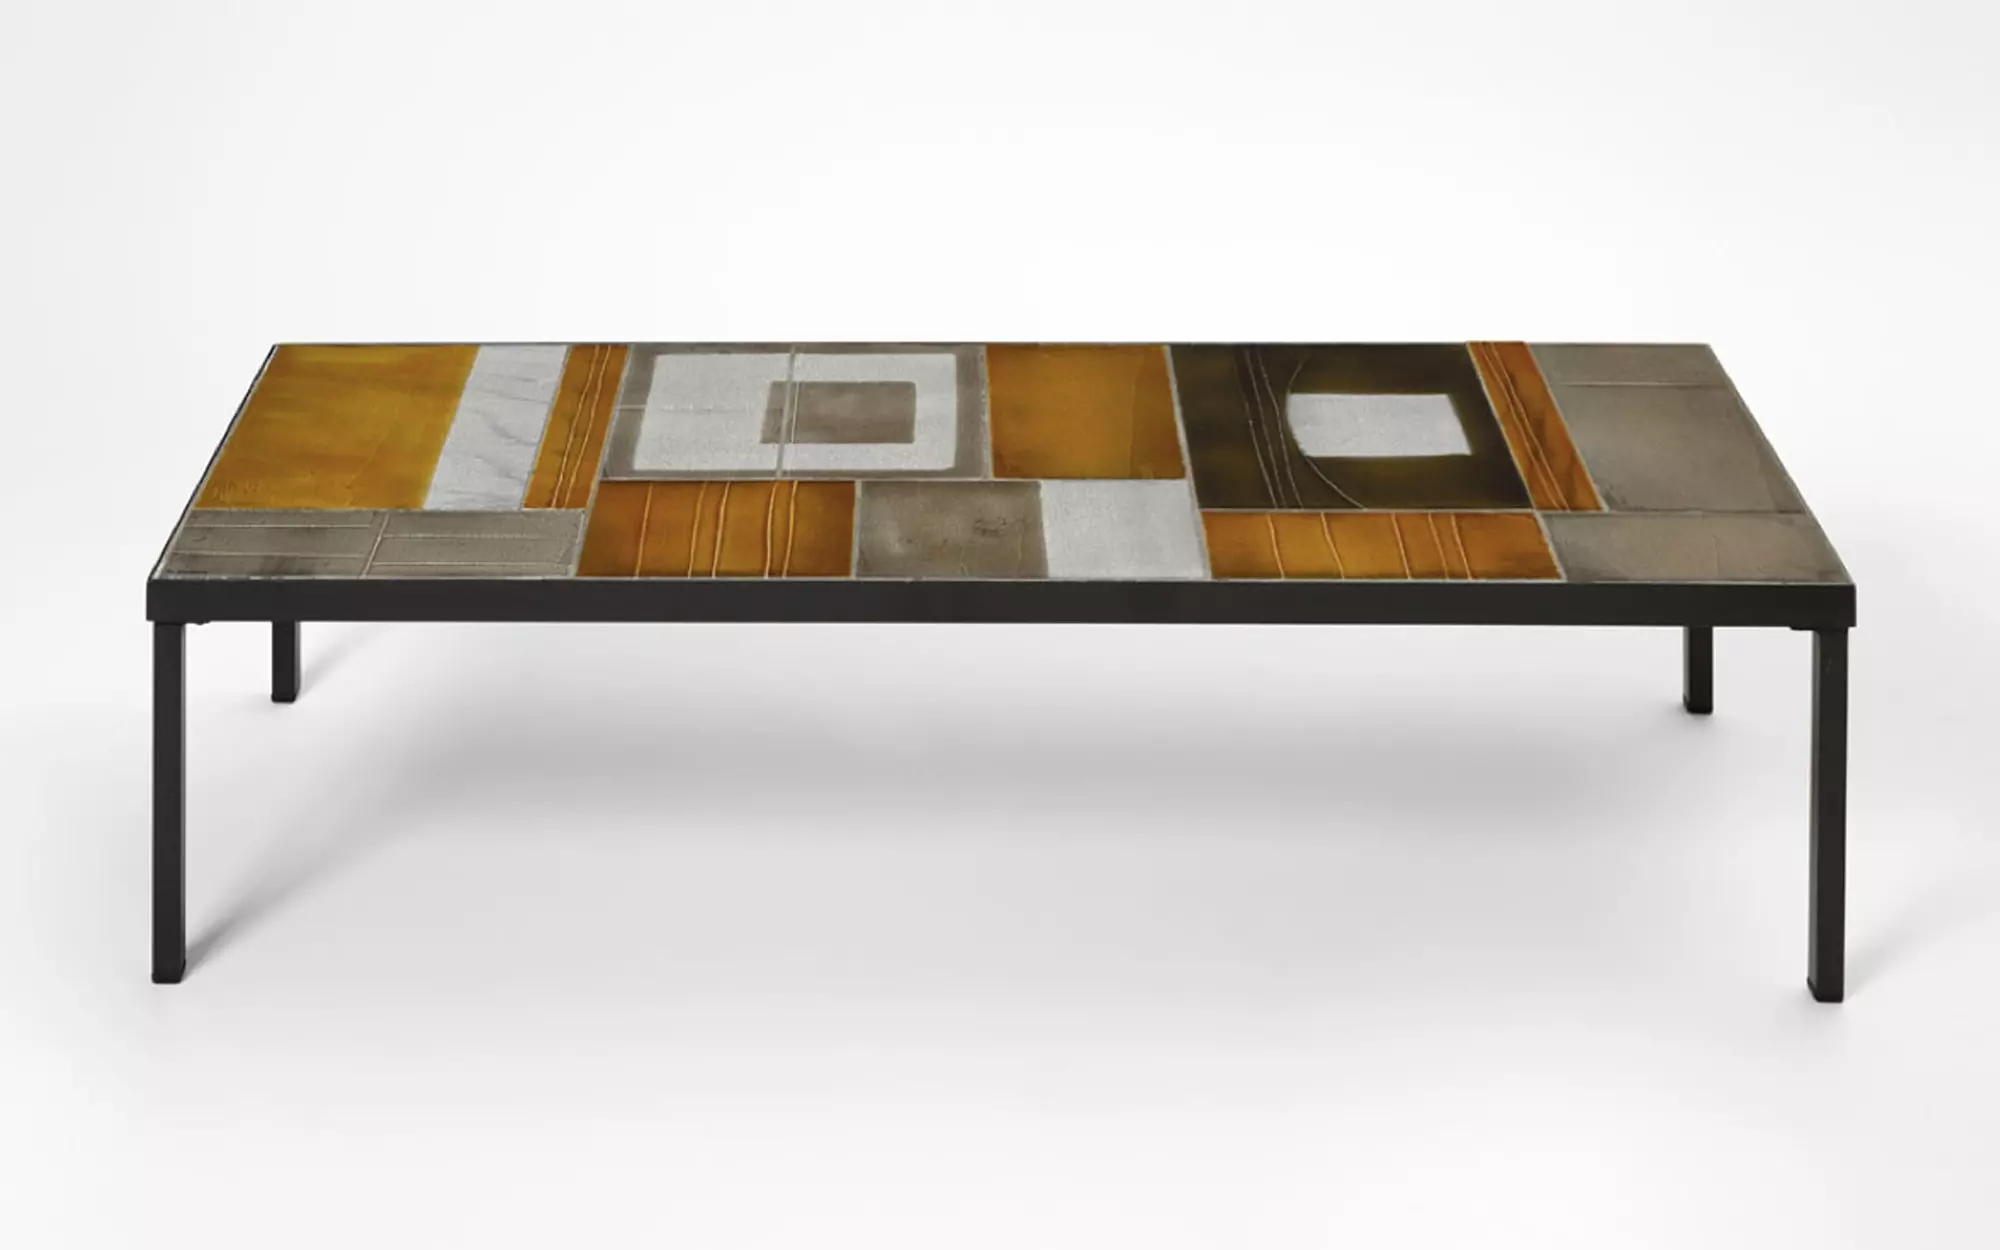 Lave - Roger Capron - Coffee table - Galerie kreo